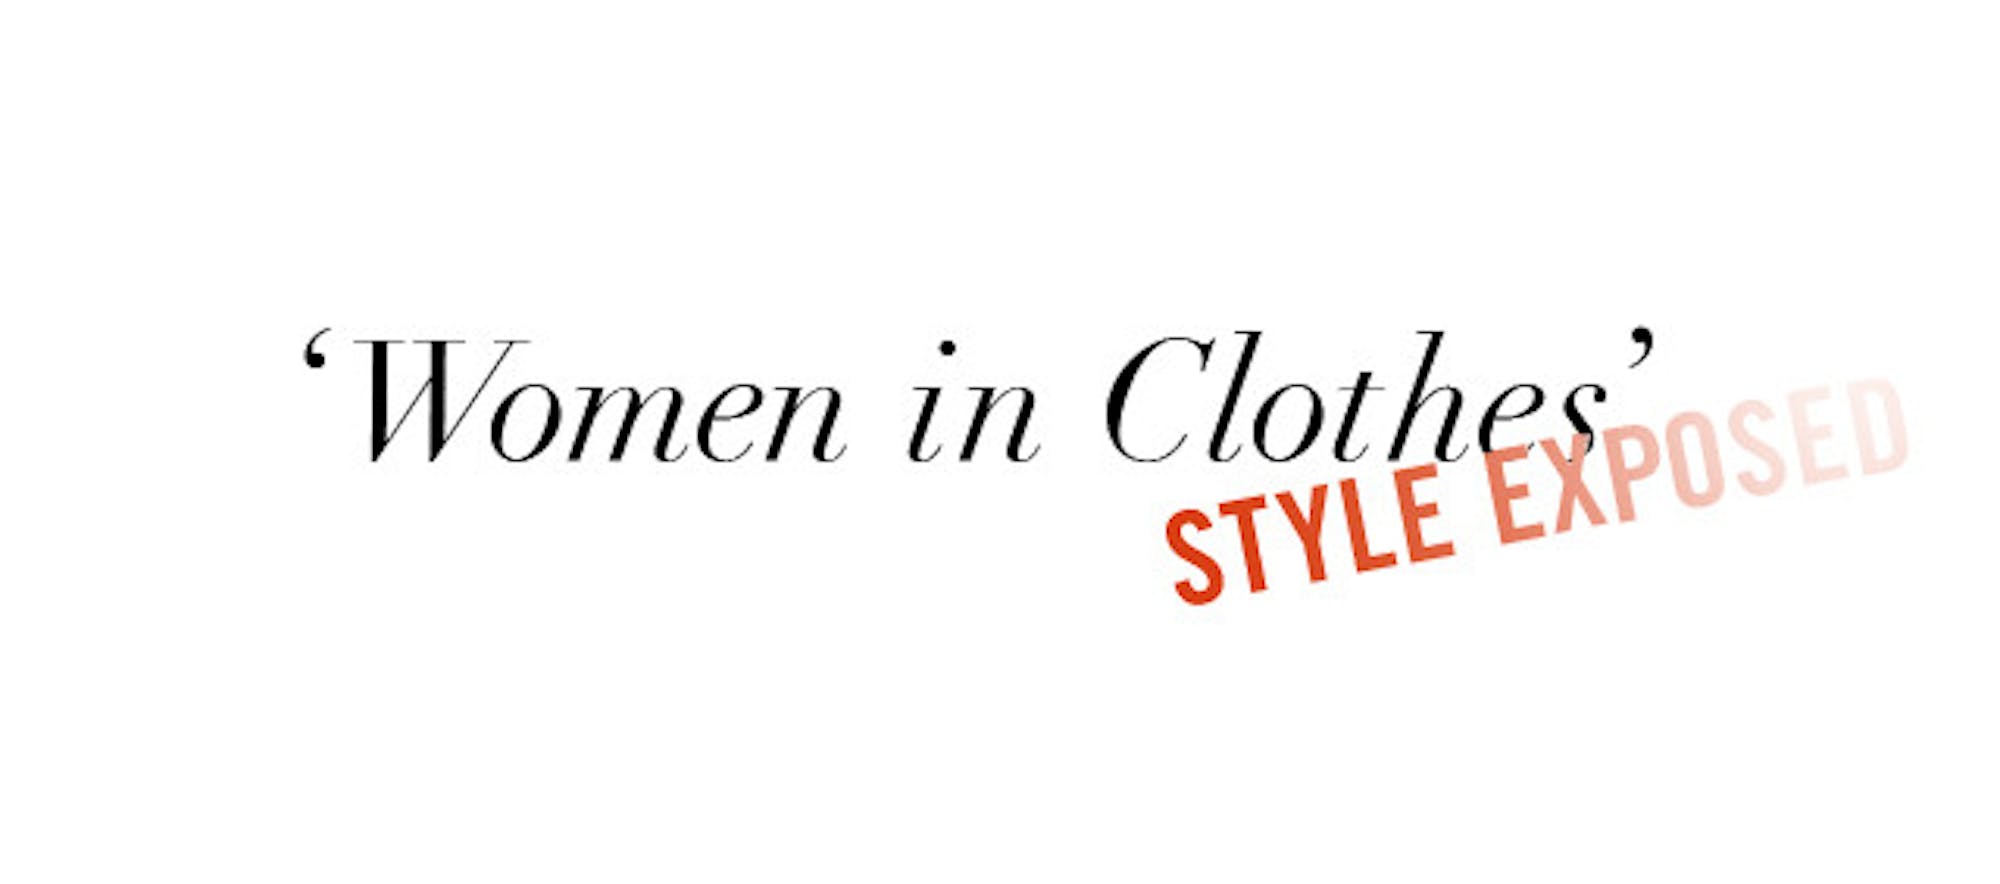 web_women in clothes_10-2-2014